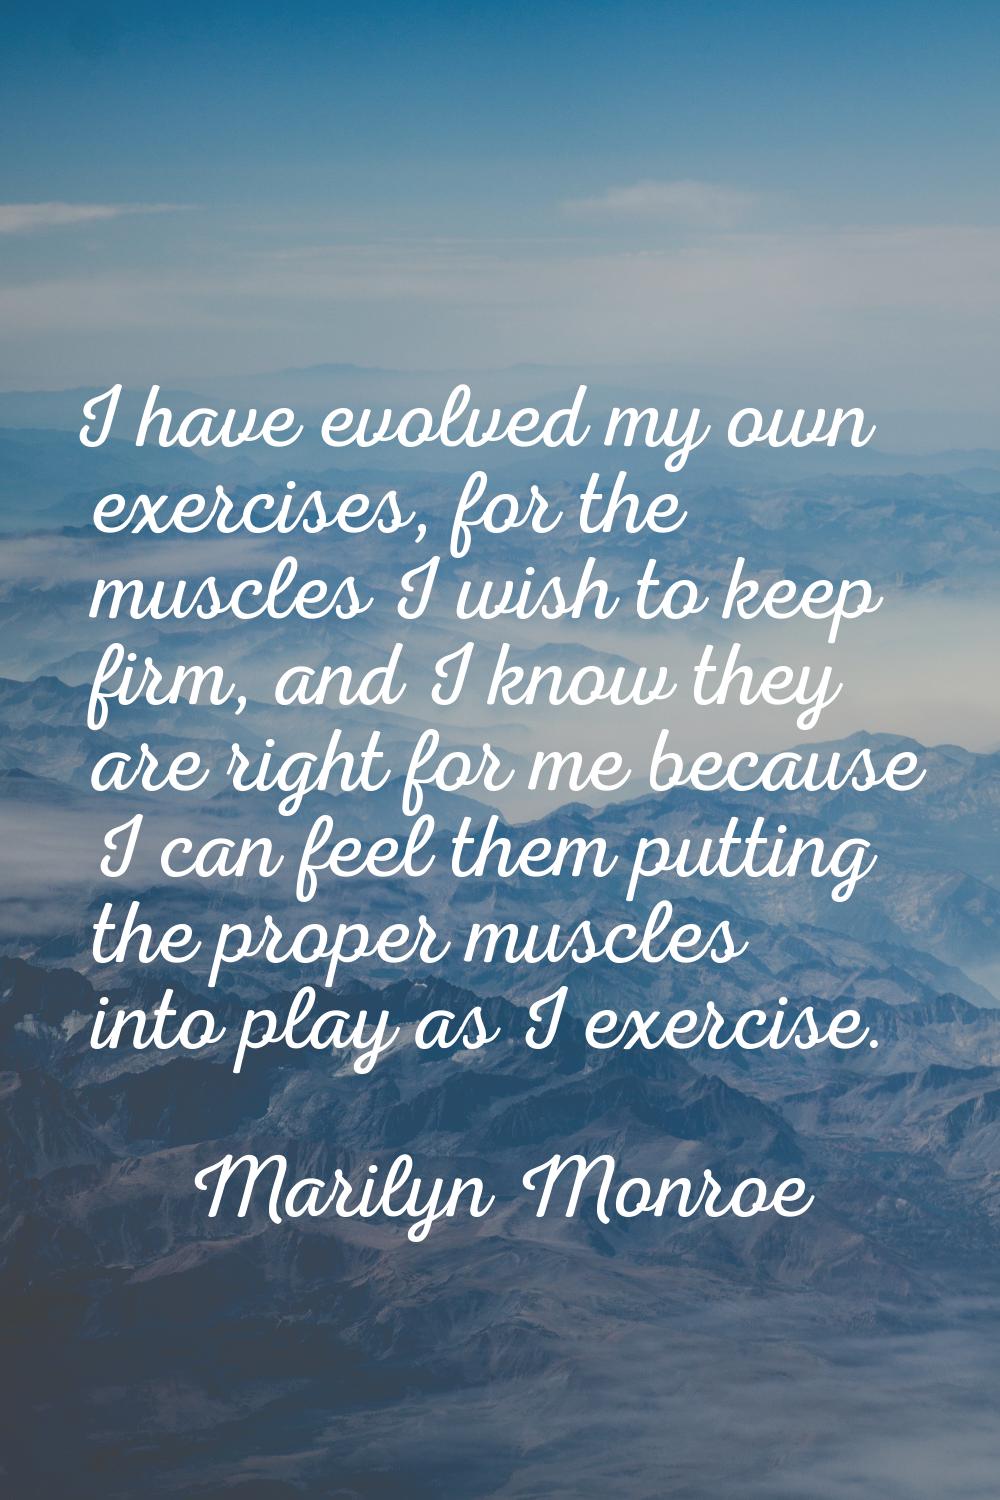 I have evolved my own exercises, for the muscles I wish to keep firm, and I know they are right for